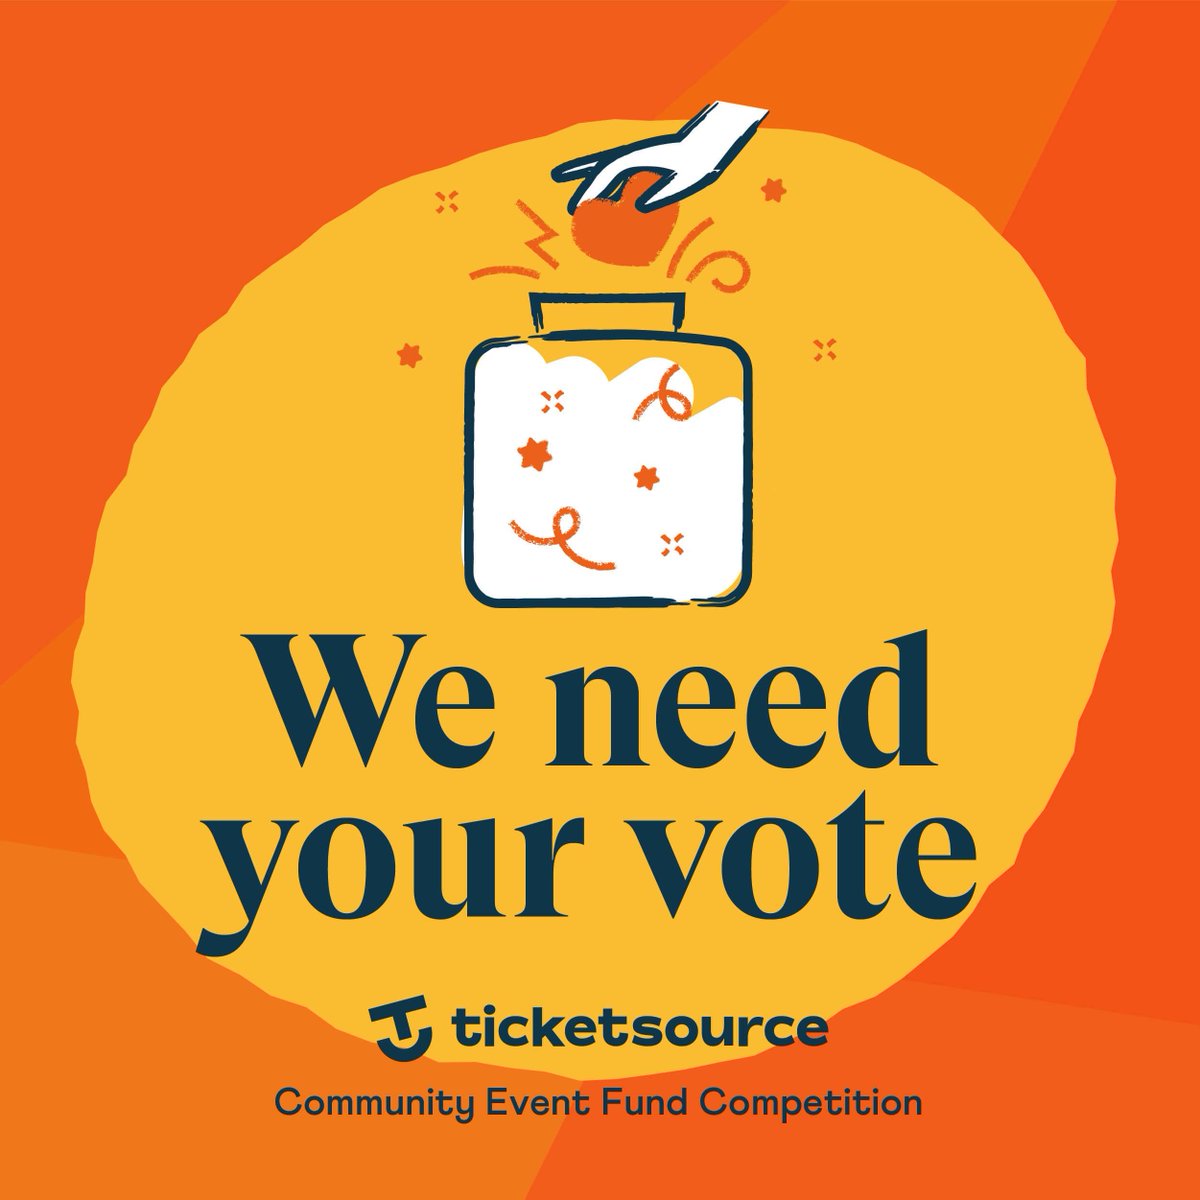 We've got an incredible opportunity to win £1,000 for our Heritage Weekend, but we need your help! All it takes is a quick click on the link below to leave your vote and help us surge ahead in the TicketSource Community Event Fund Competition. buff.ly/4a62Hai